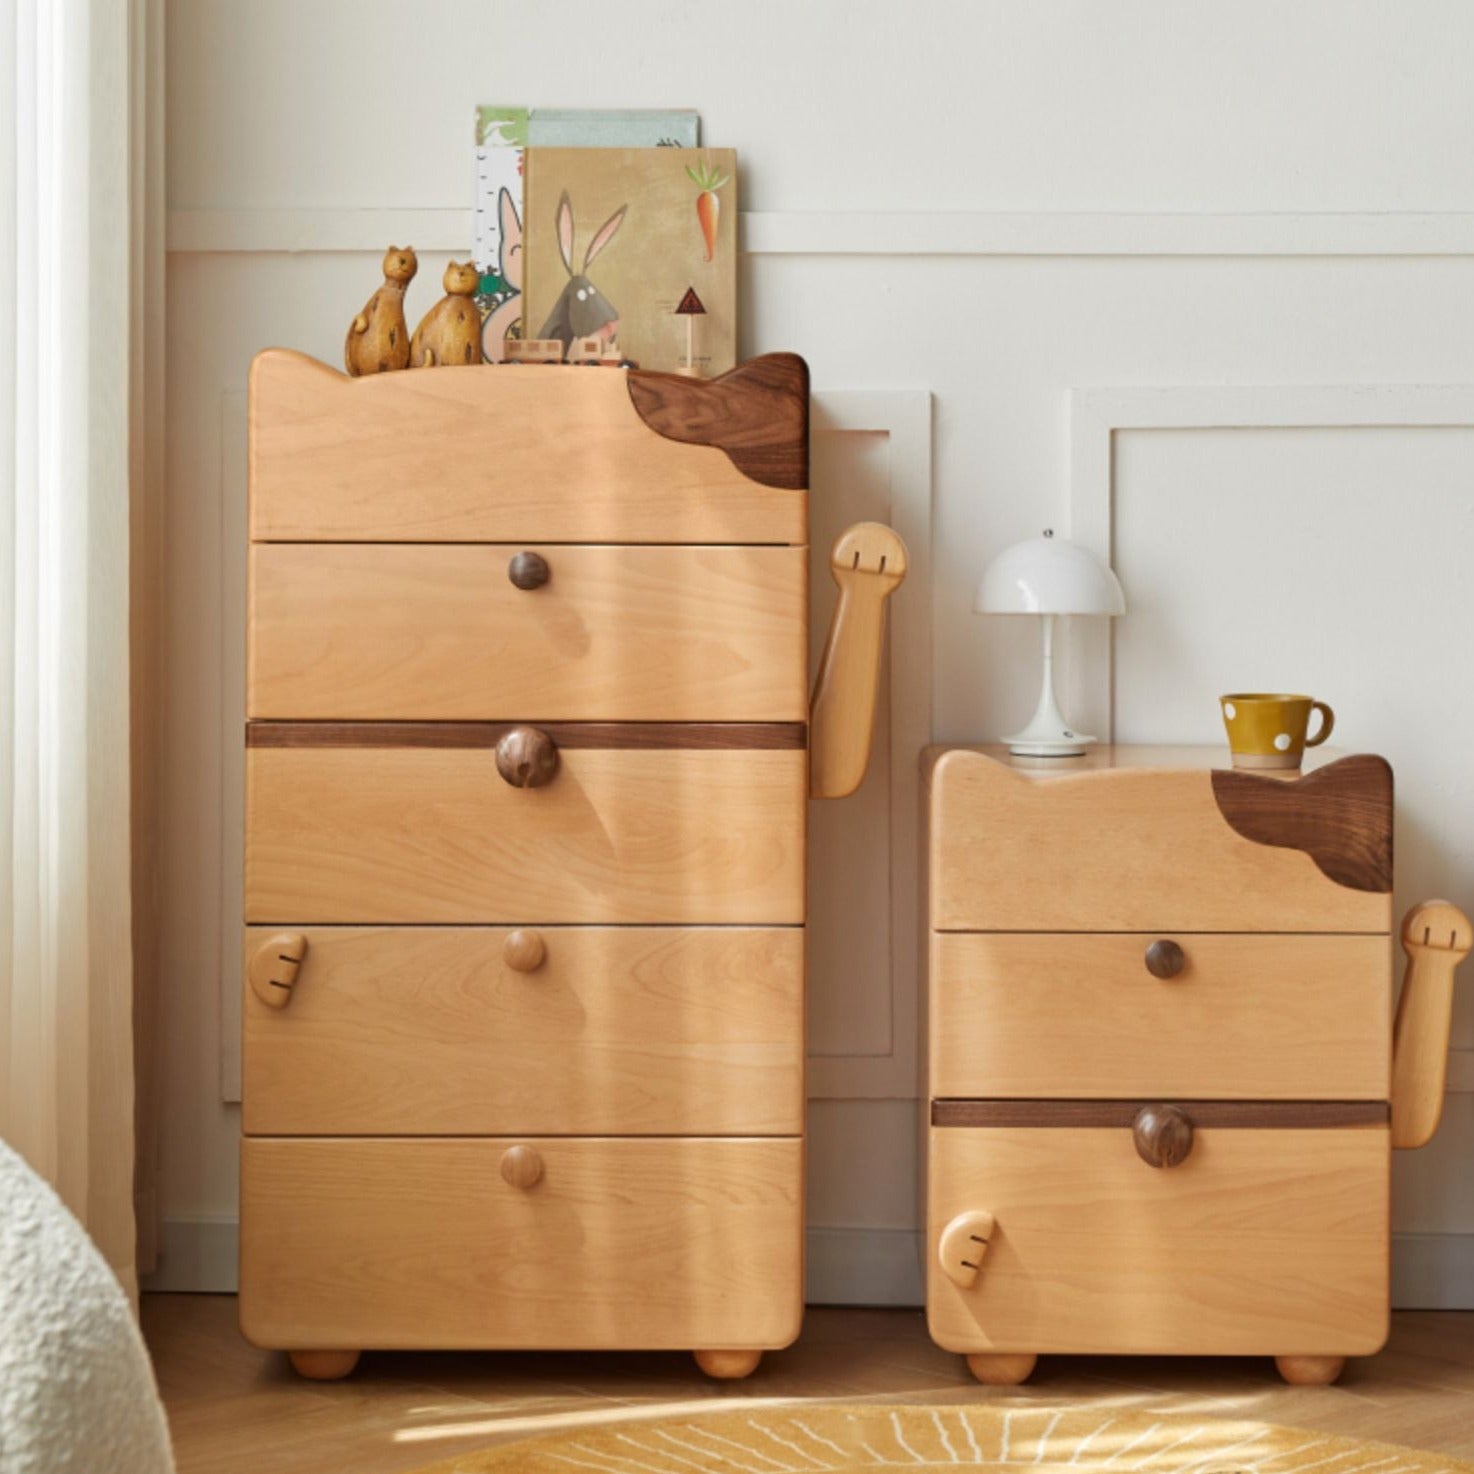 Beech Solid Wood  kids chest of drawers -Type Toy Storage Cabinet"